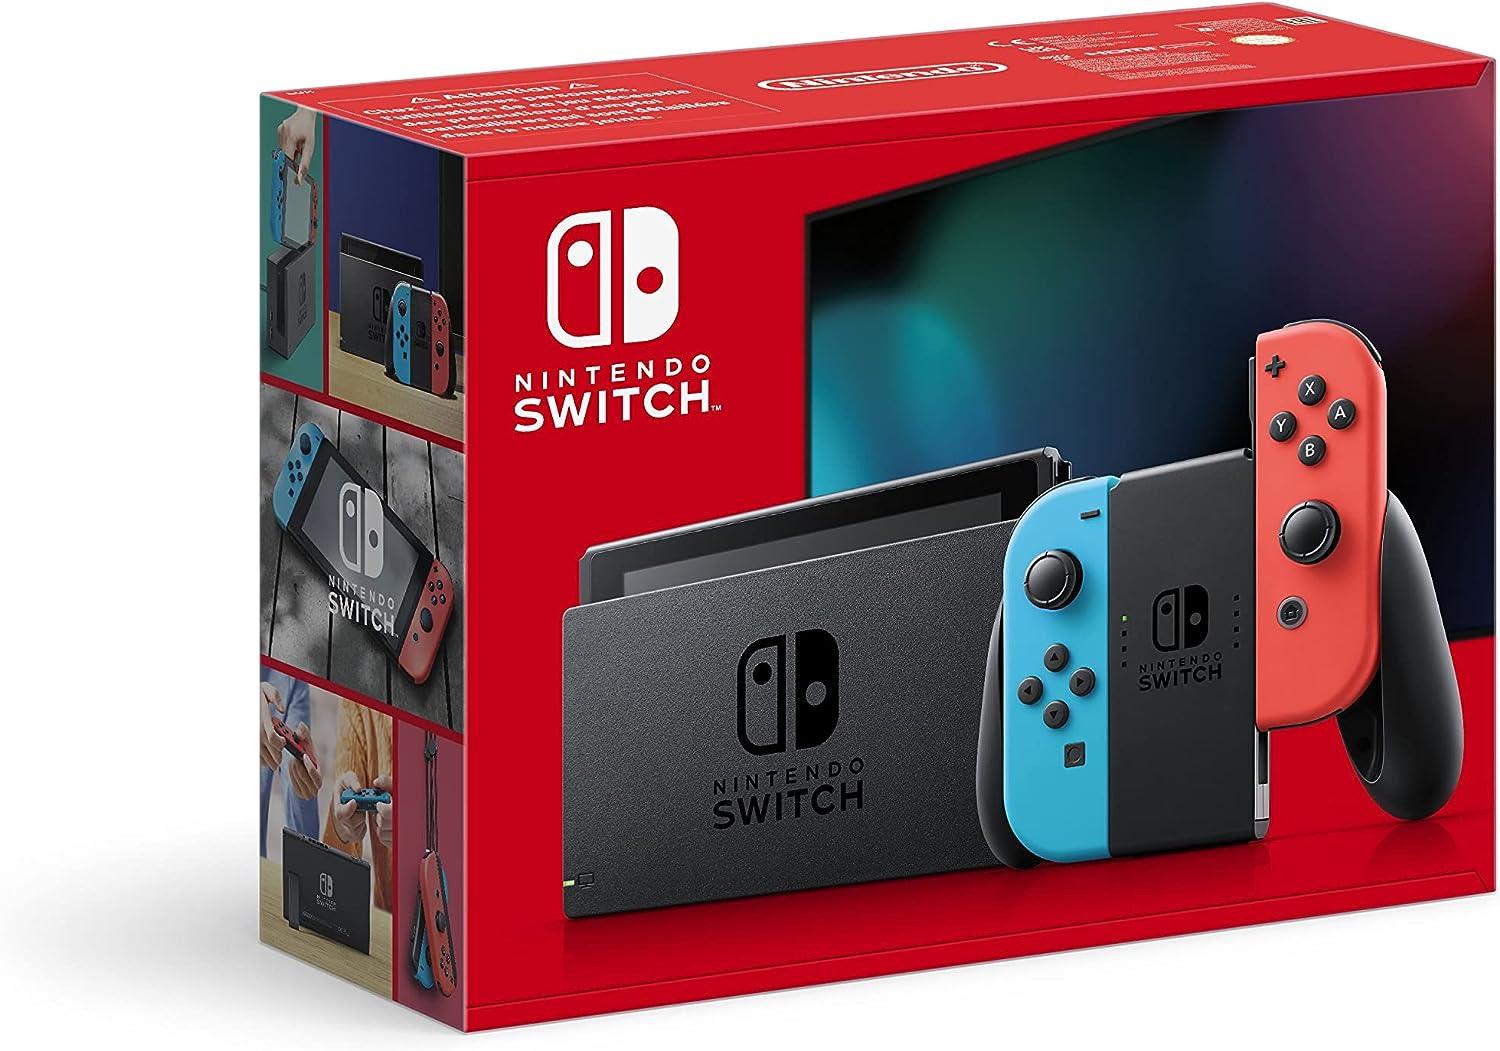 Nintendo Switch HW (Neon Red/Neon Blue) - Want a New Gadget